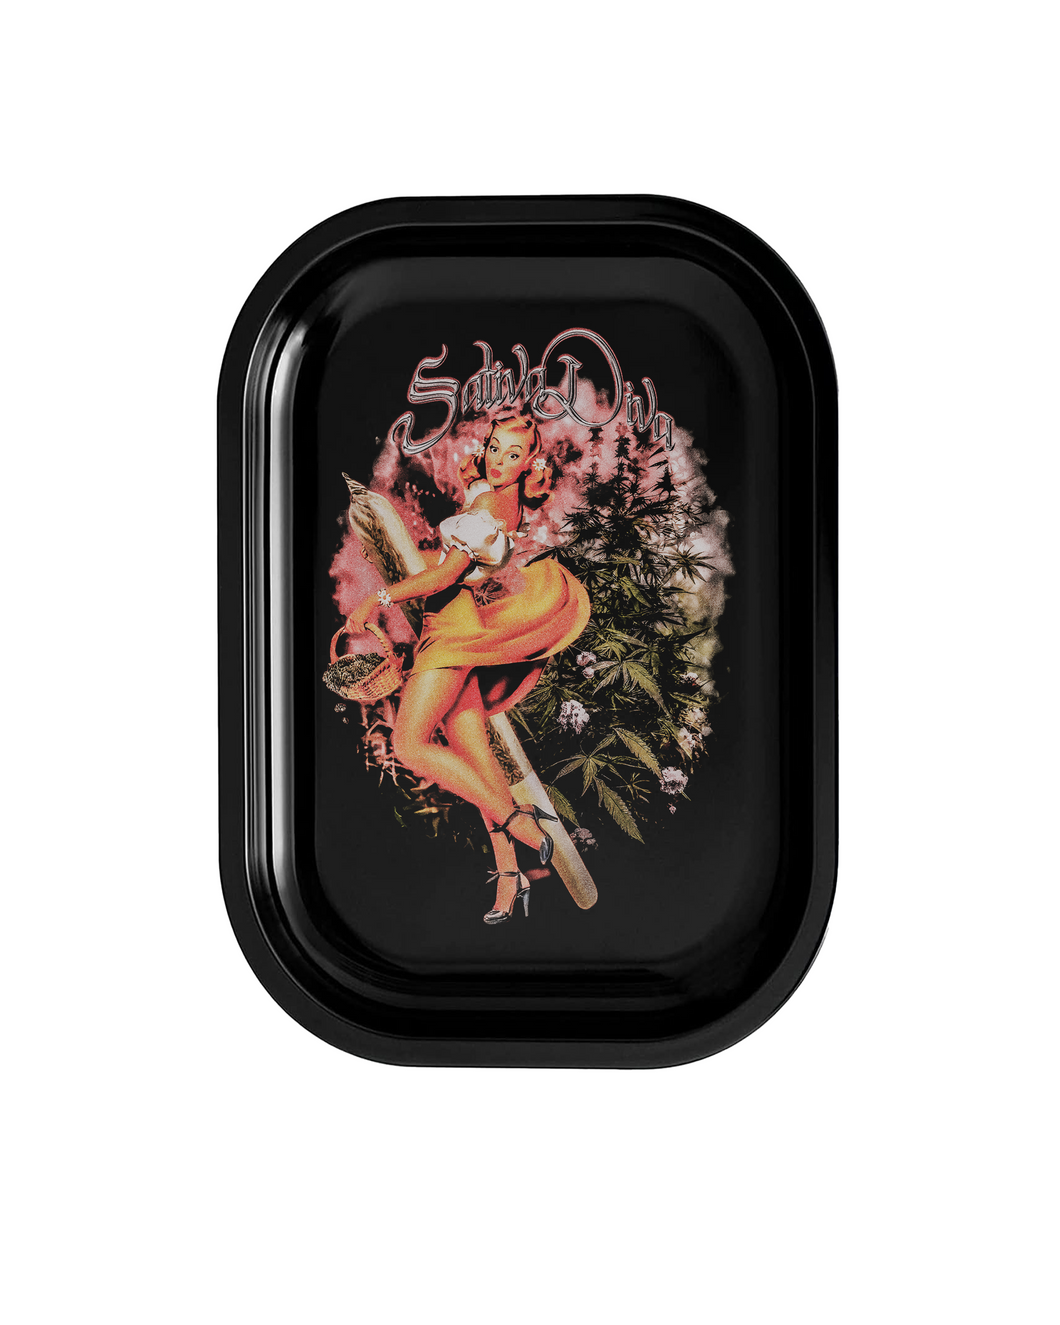 Sativa Diva Pinup Rolling Tray